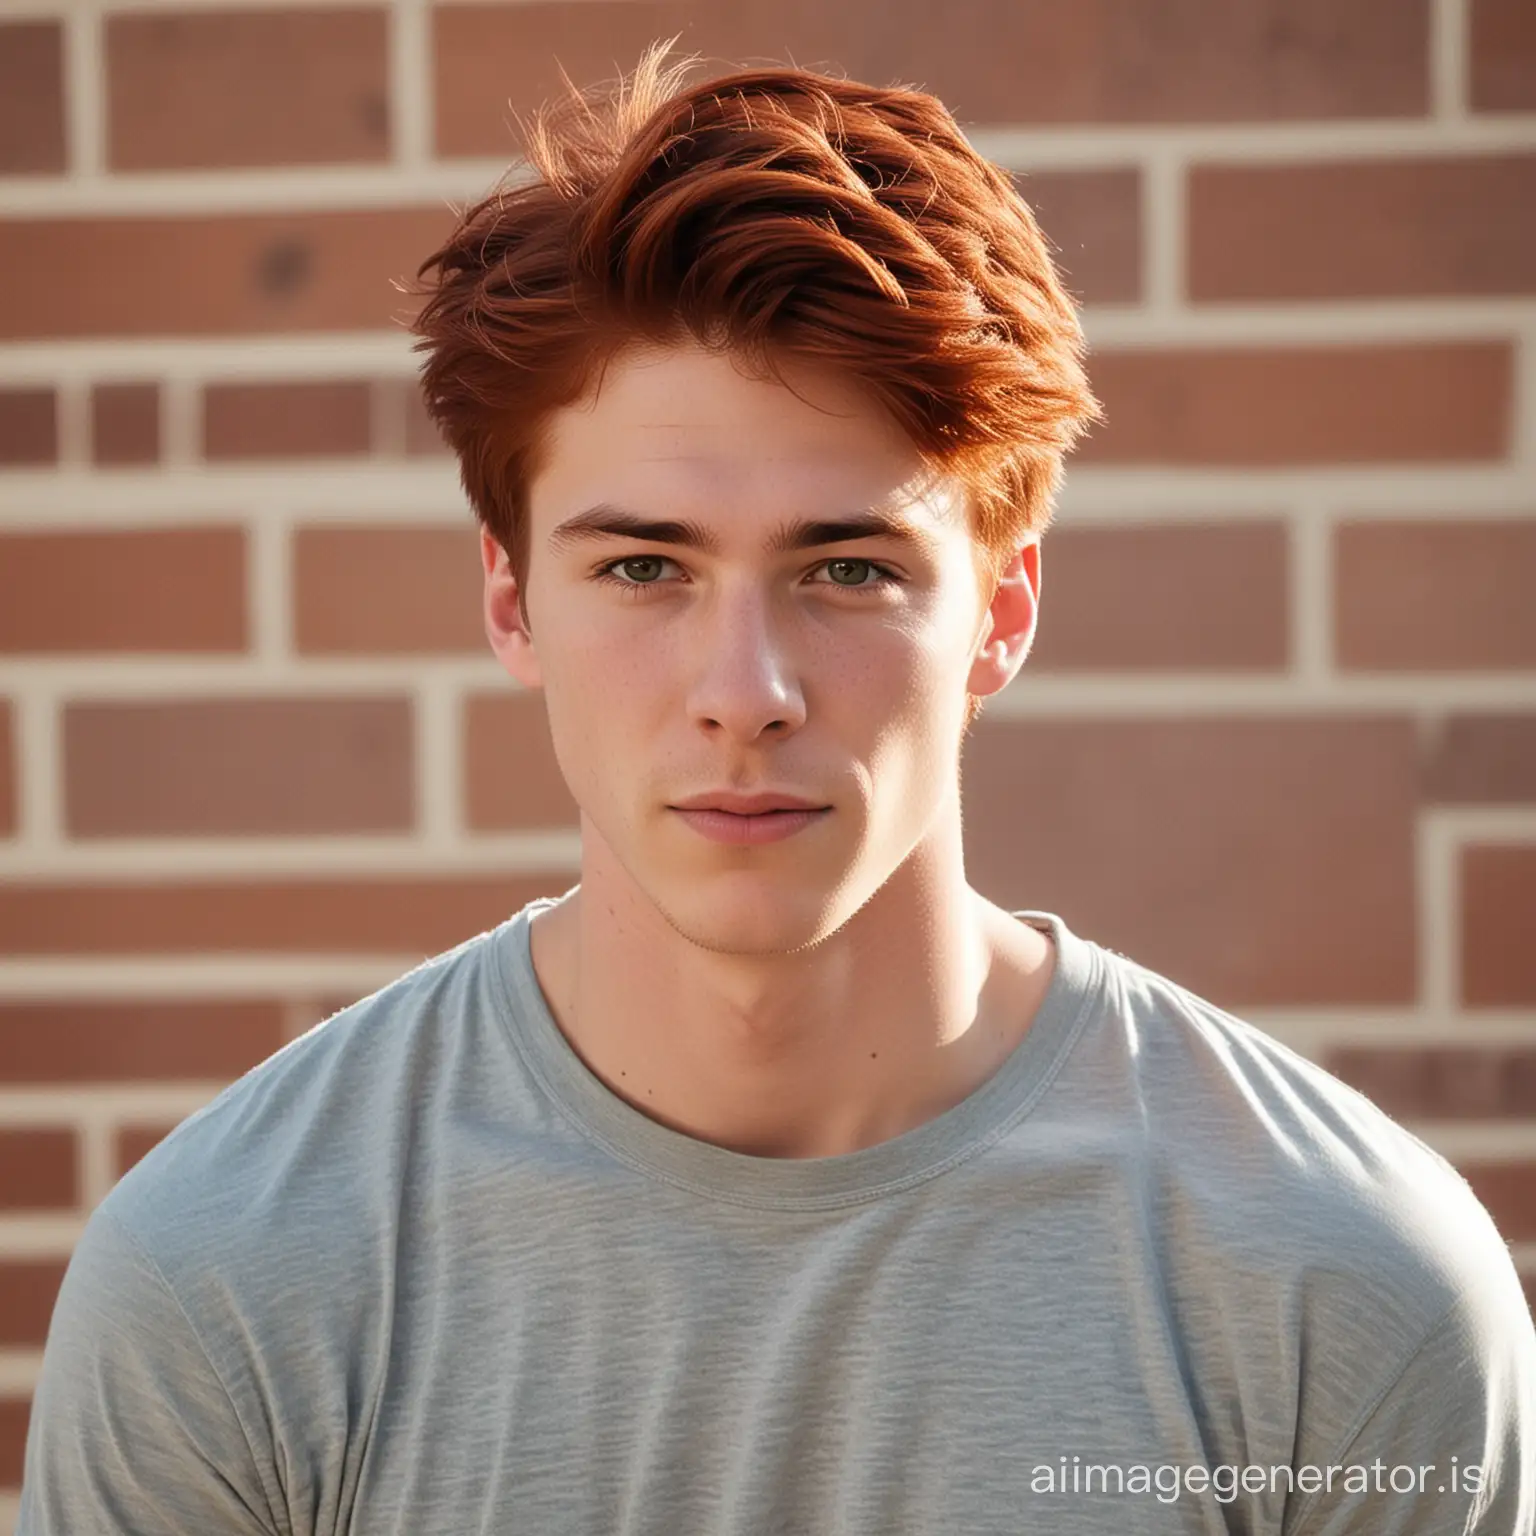 red hair guy guy, half body, college well casual fit 19 years old